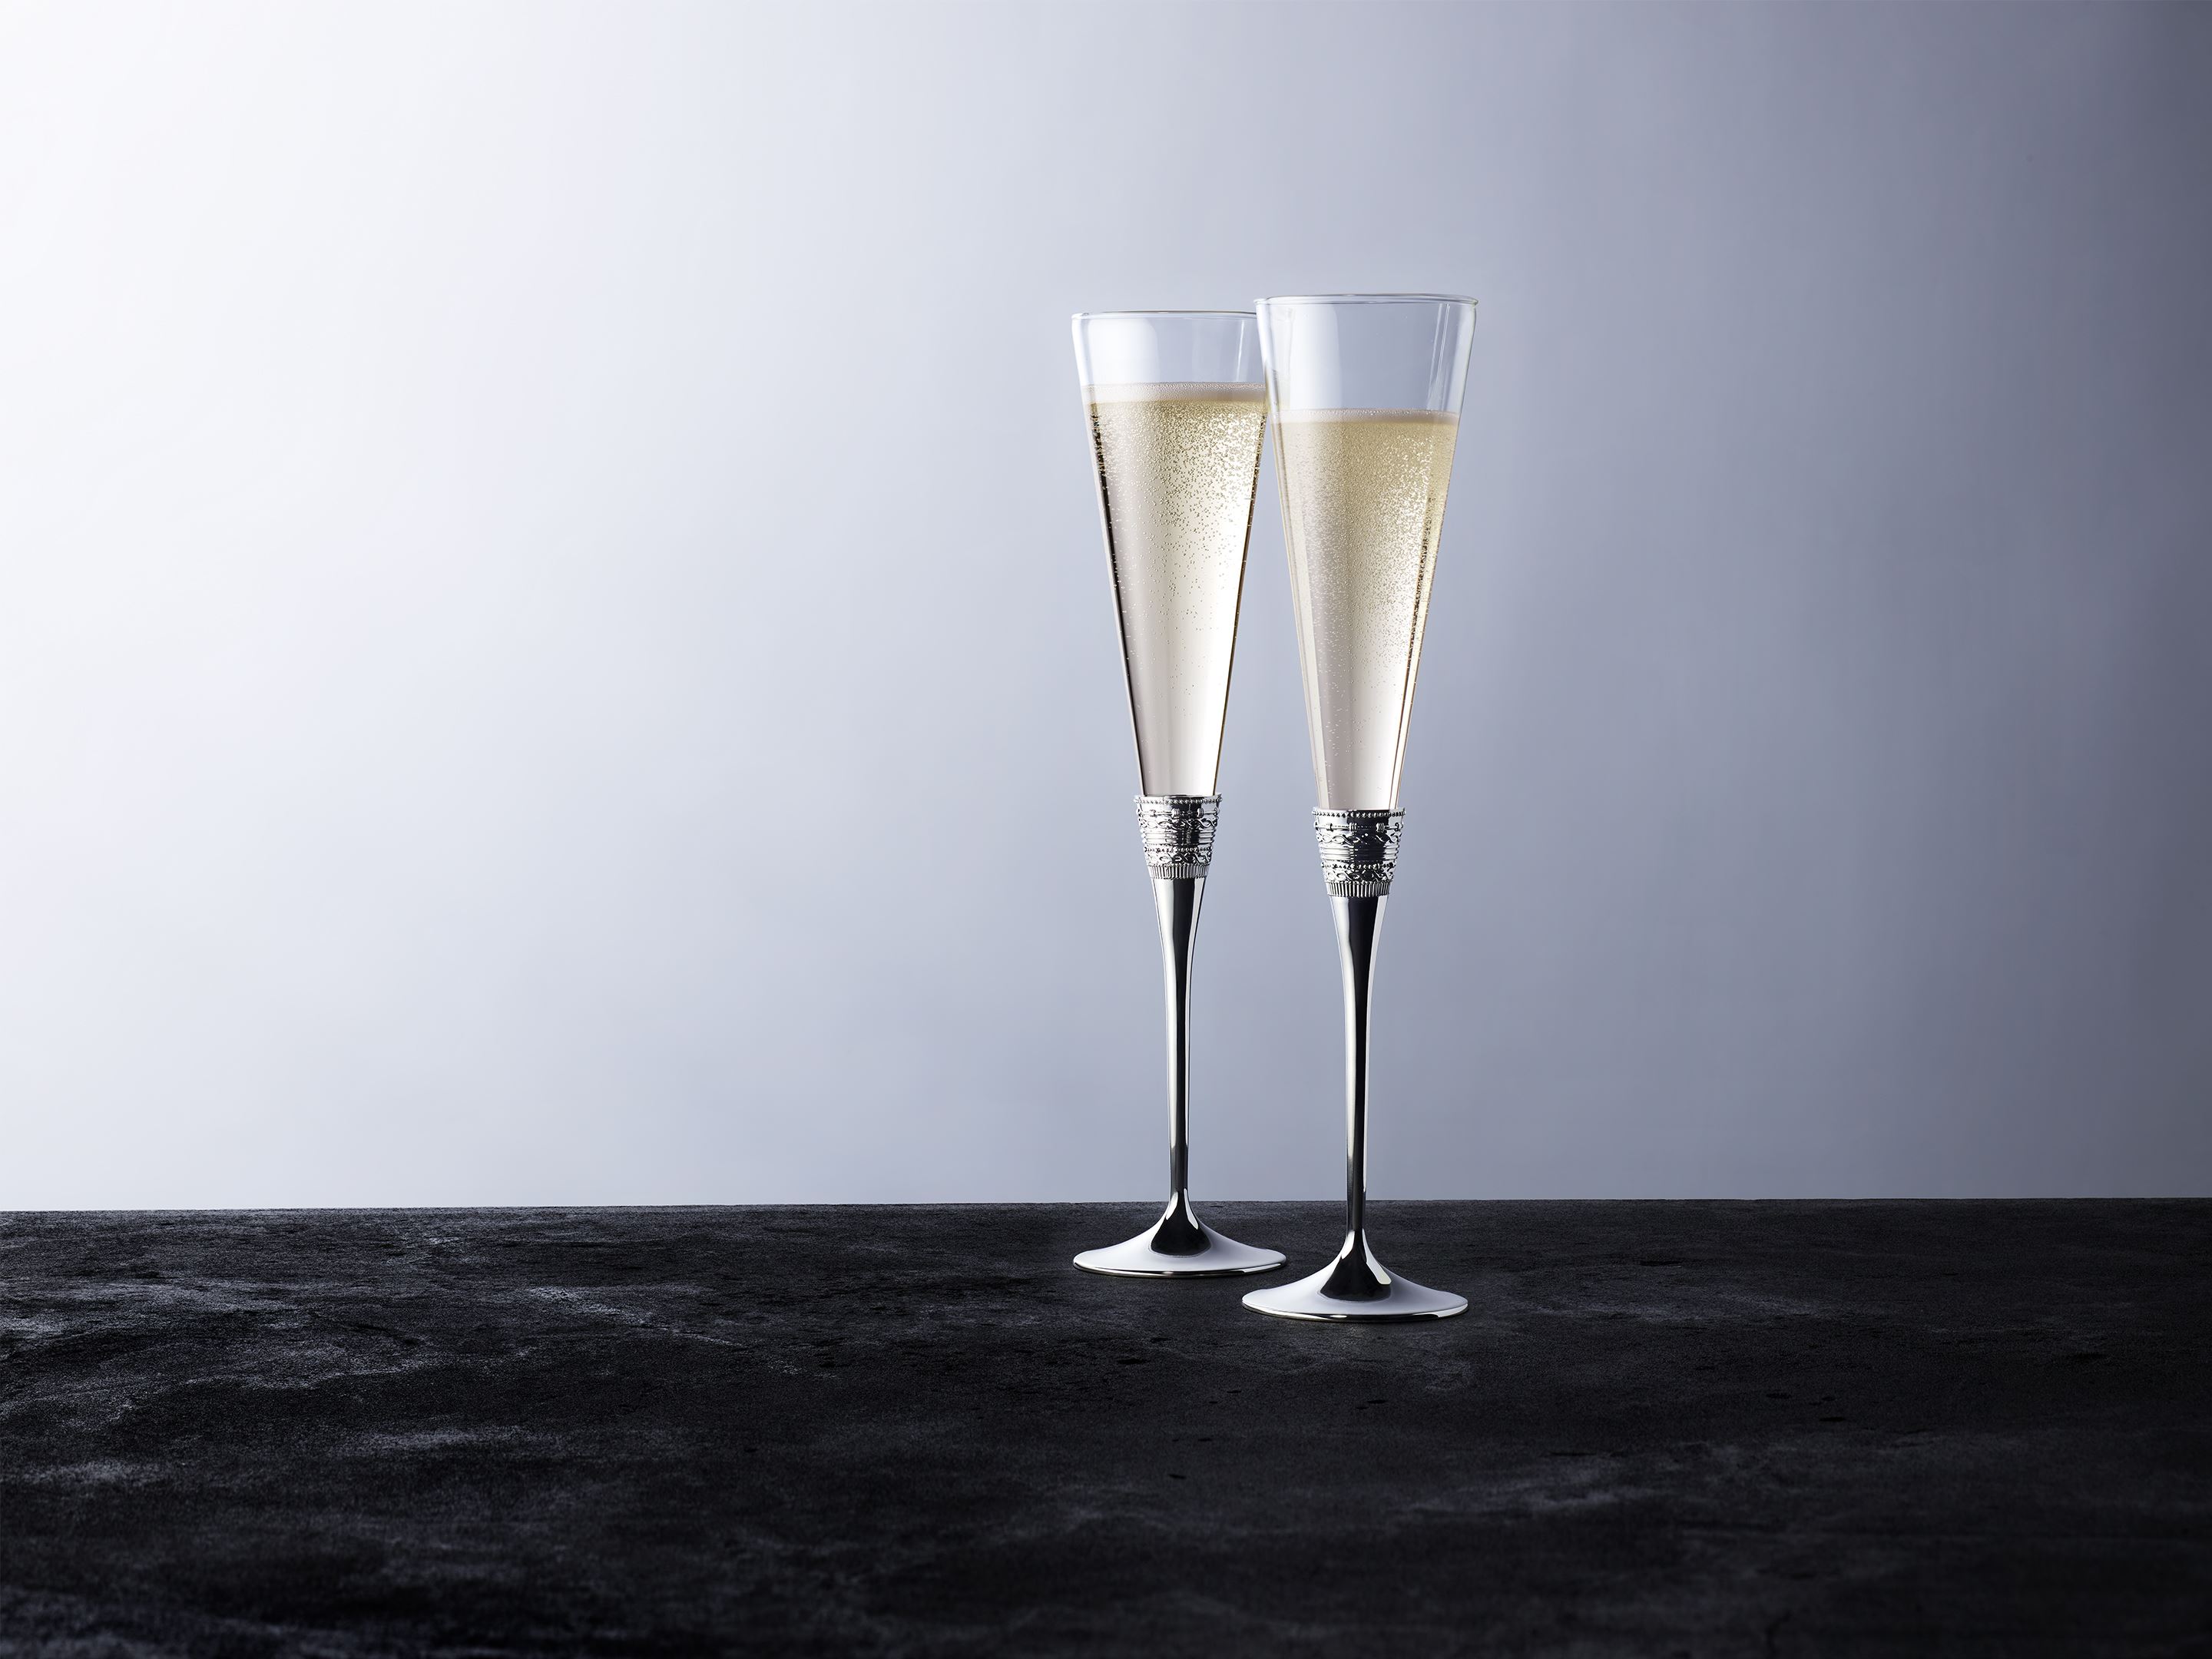 https://www.wedgwood.com/-/media/wedgwood/images/wedgwood/product-type/glassware-and-drinkware/title-components/champagne_flutes.jpg